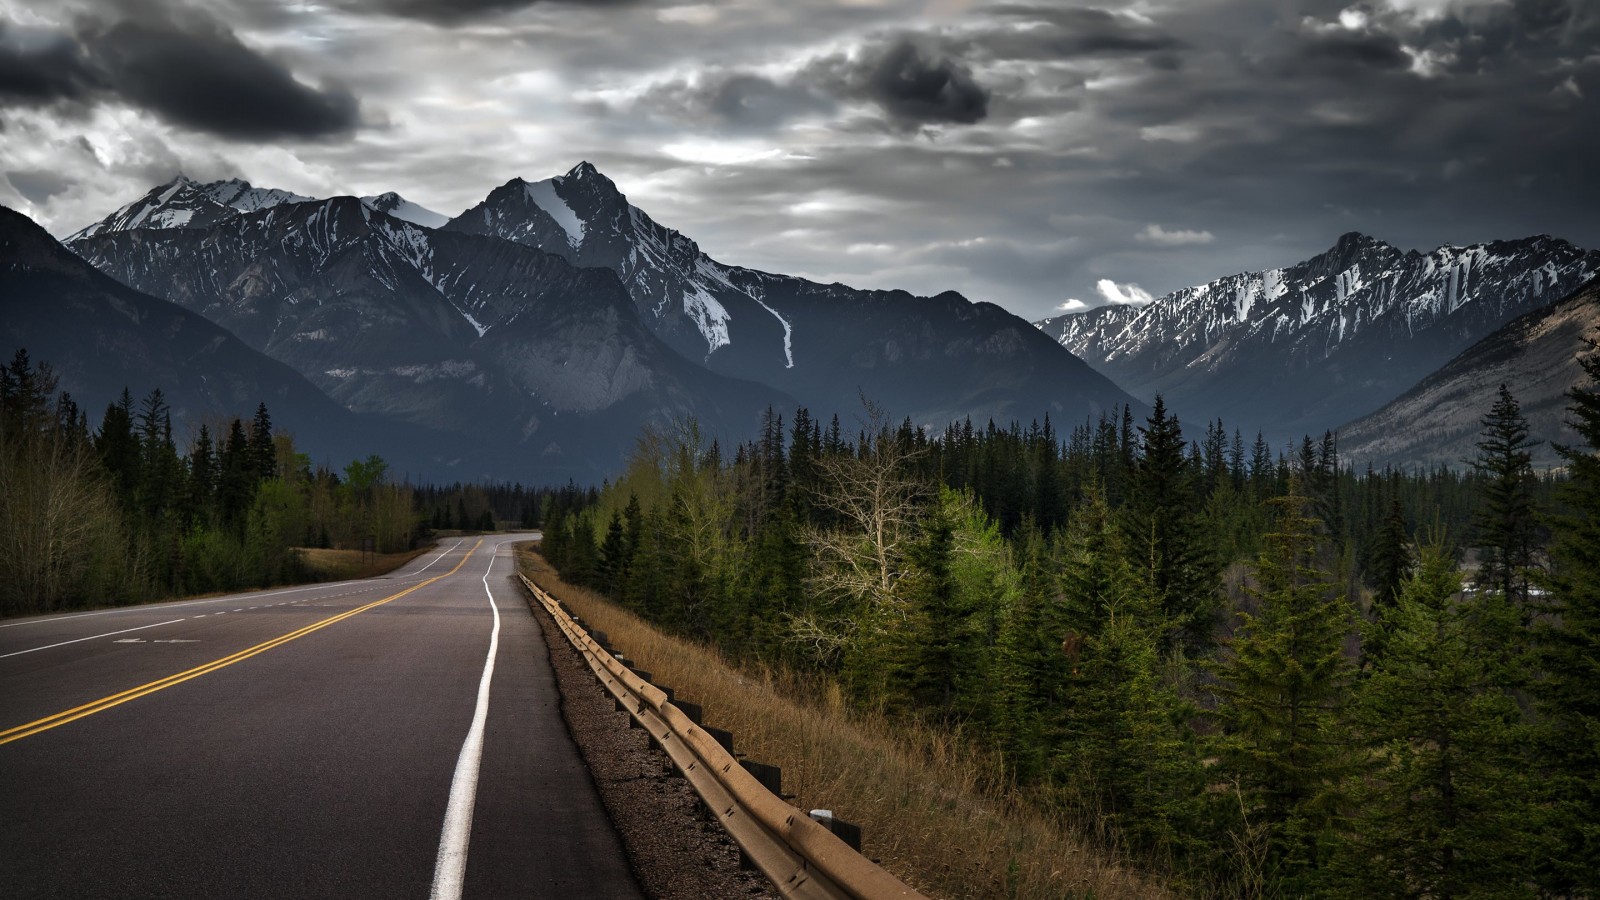 Road trip on a stormy day, Canada Wallpaper for Desktop 1600x900